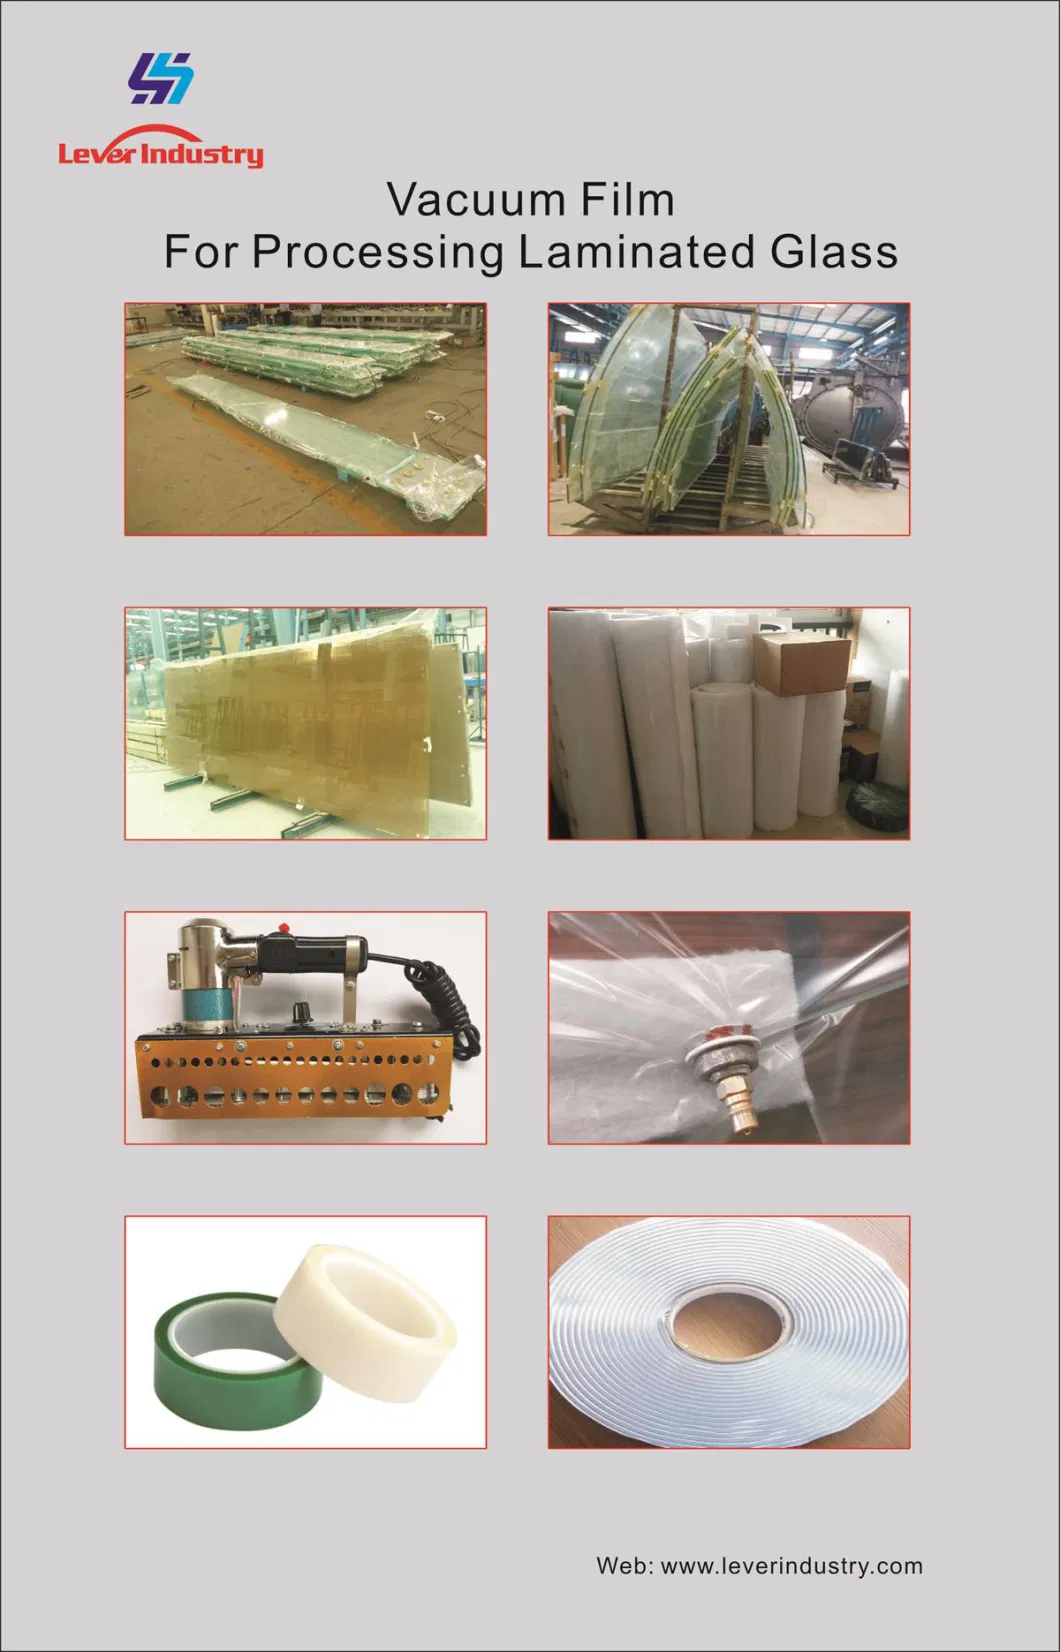 Spare Parts for Glass Laminating Furnace, Parts for Glass Laminating Line,